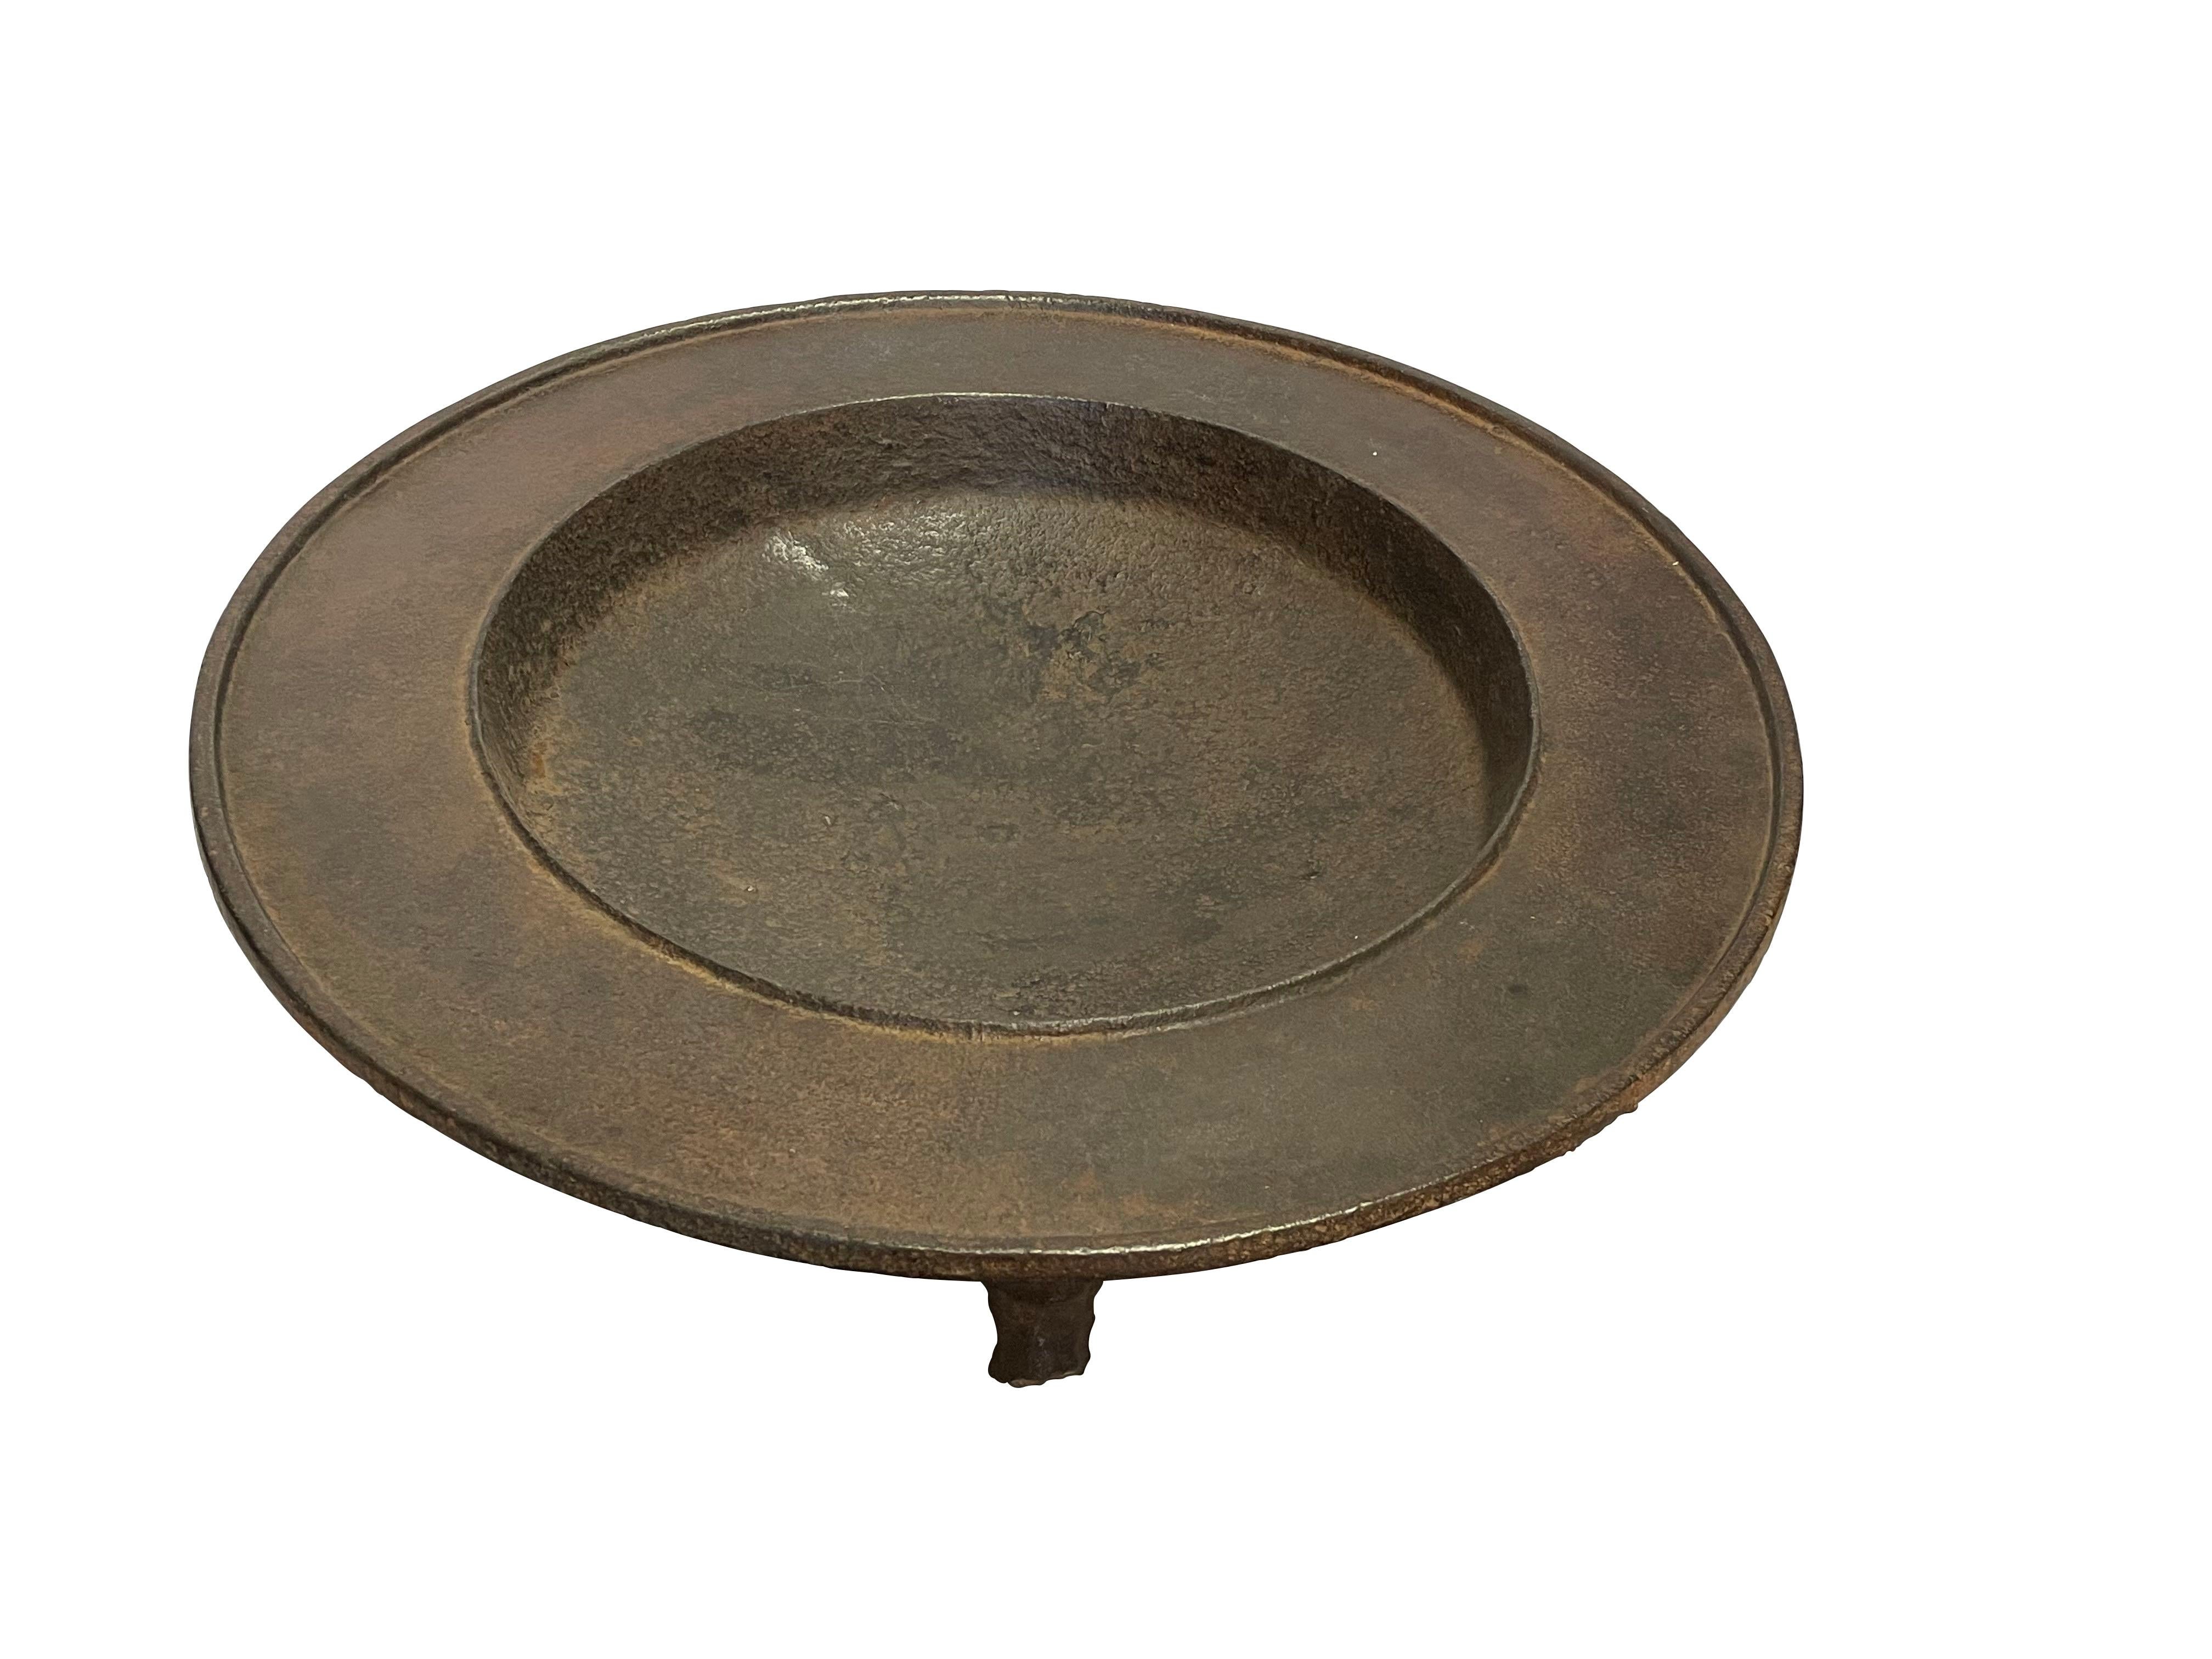 19th Century Indian round footed iron bowl on three legs.
Beautiful natural patina.
Often used as a food offering bowl.